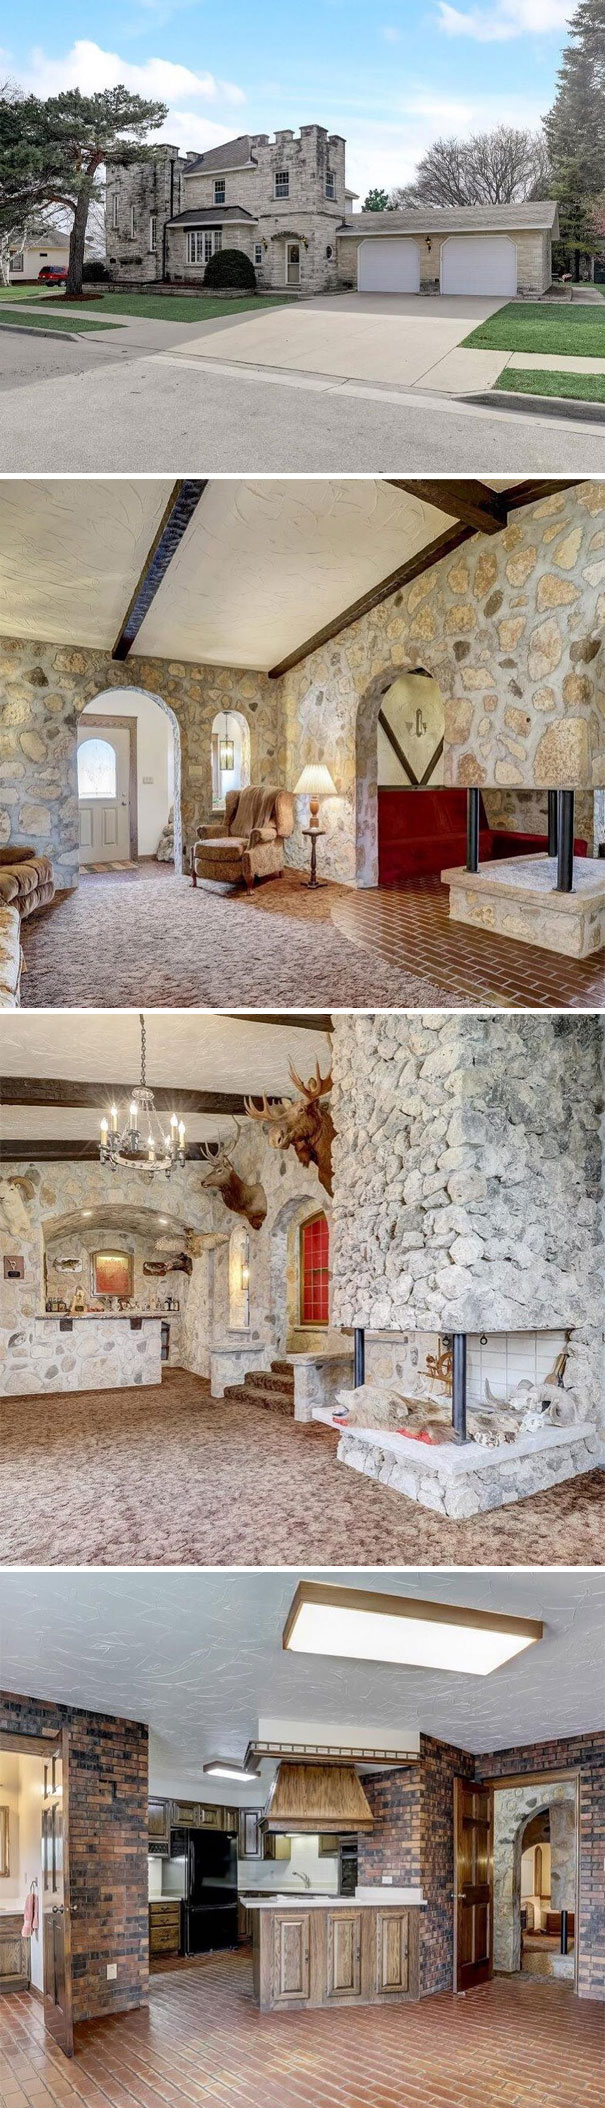 Here’s A 3,500 Square Foot Castle In Harford, Wi For $420k. 4 Bd, 4 Ba. .58 Acres